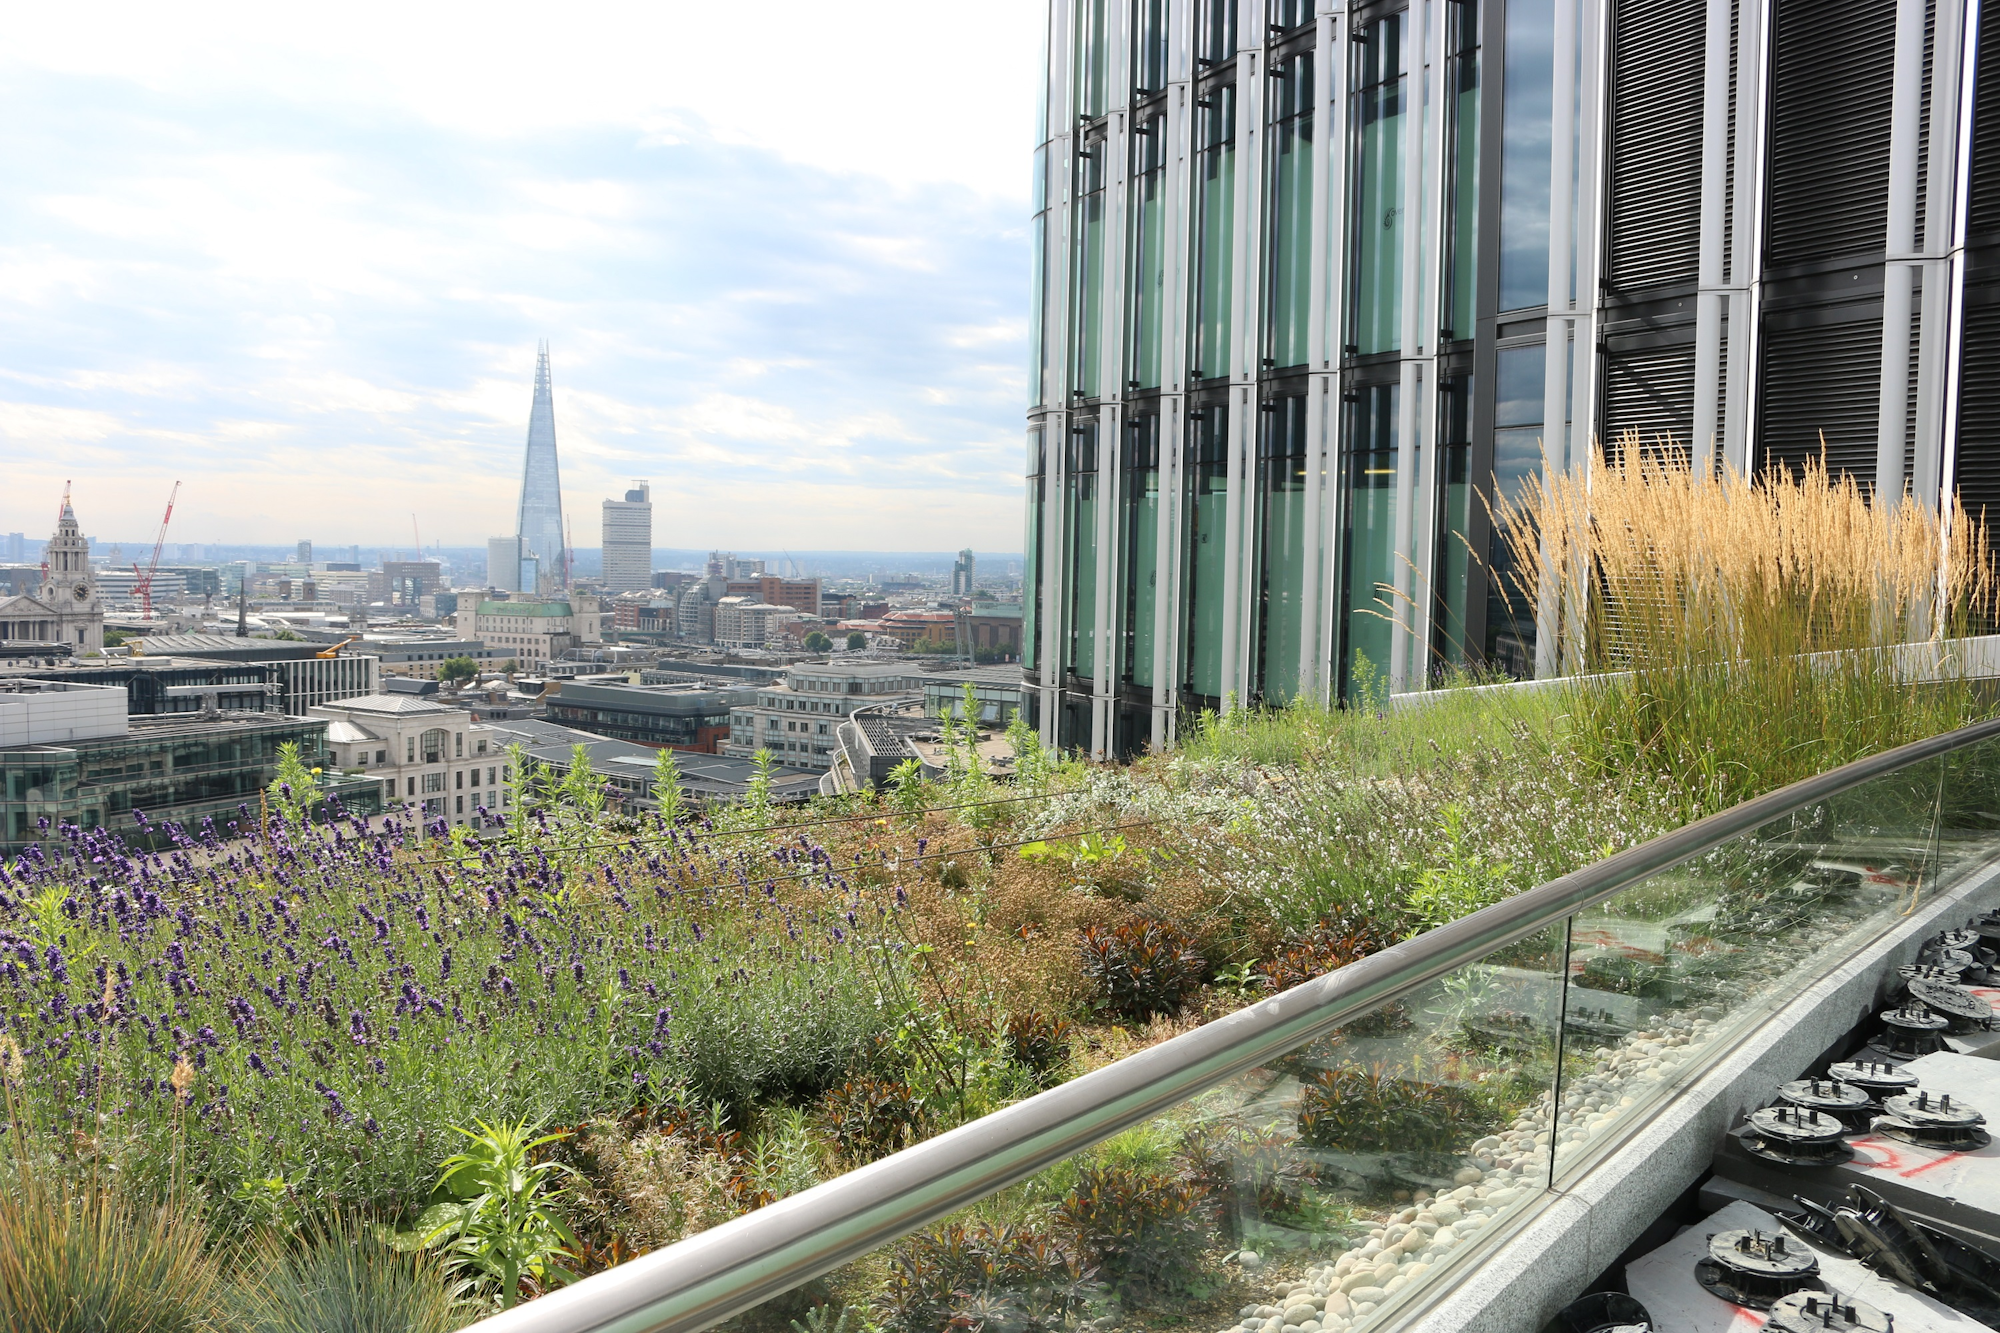 green roof behind a glass balustrade overlooking the shard and high rise buildings